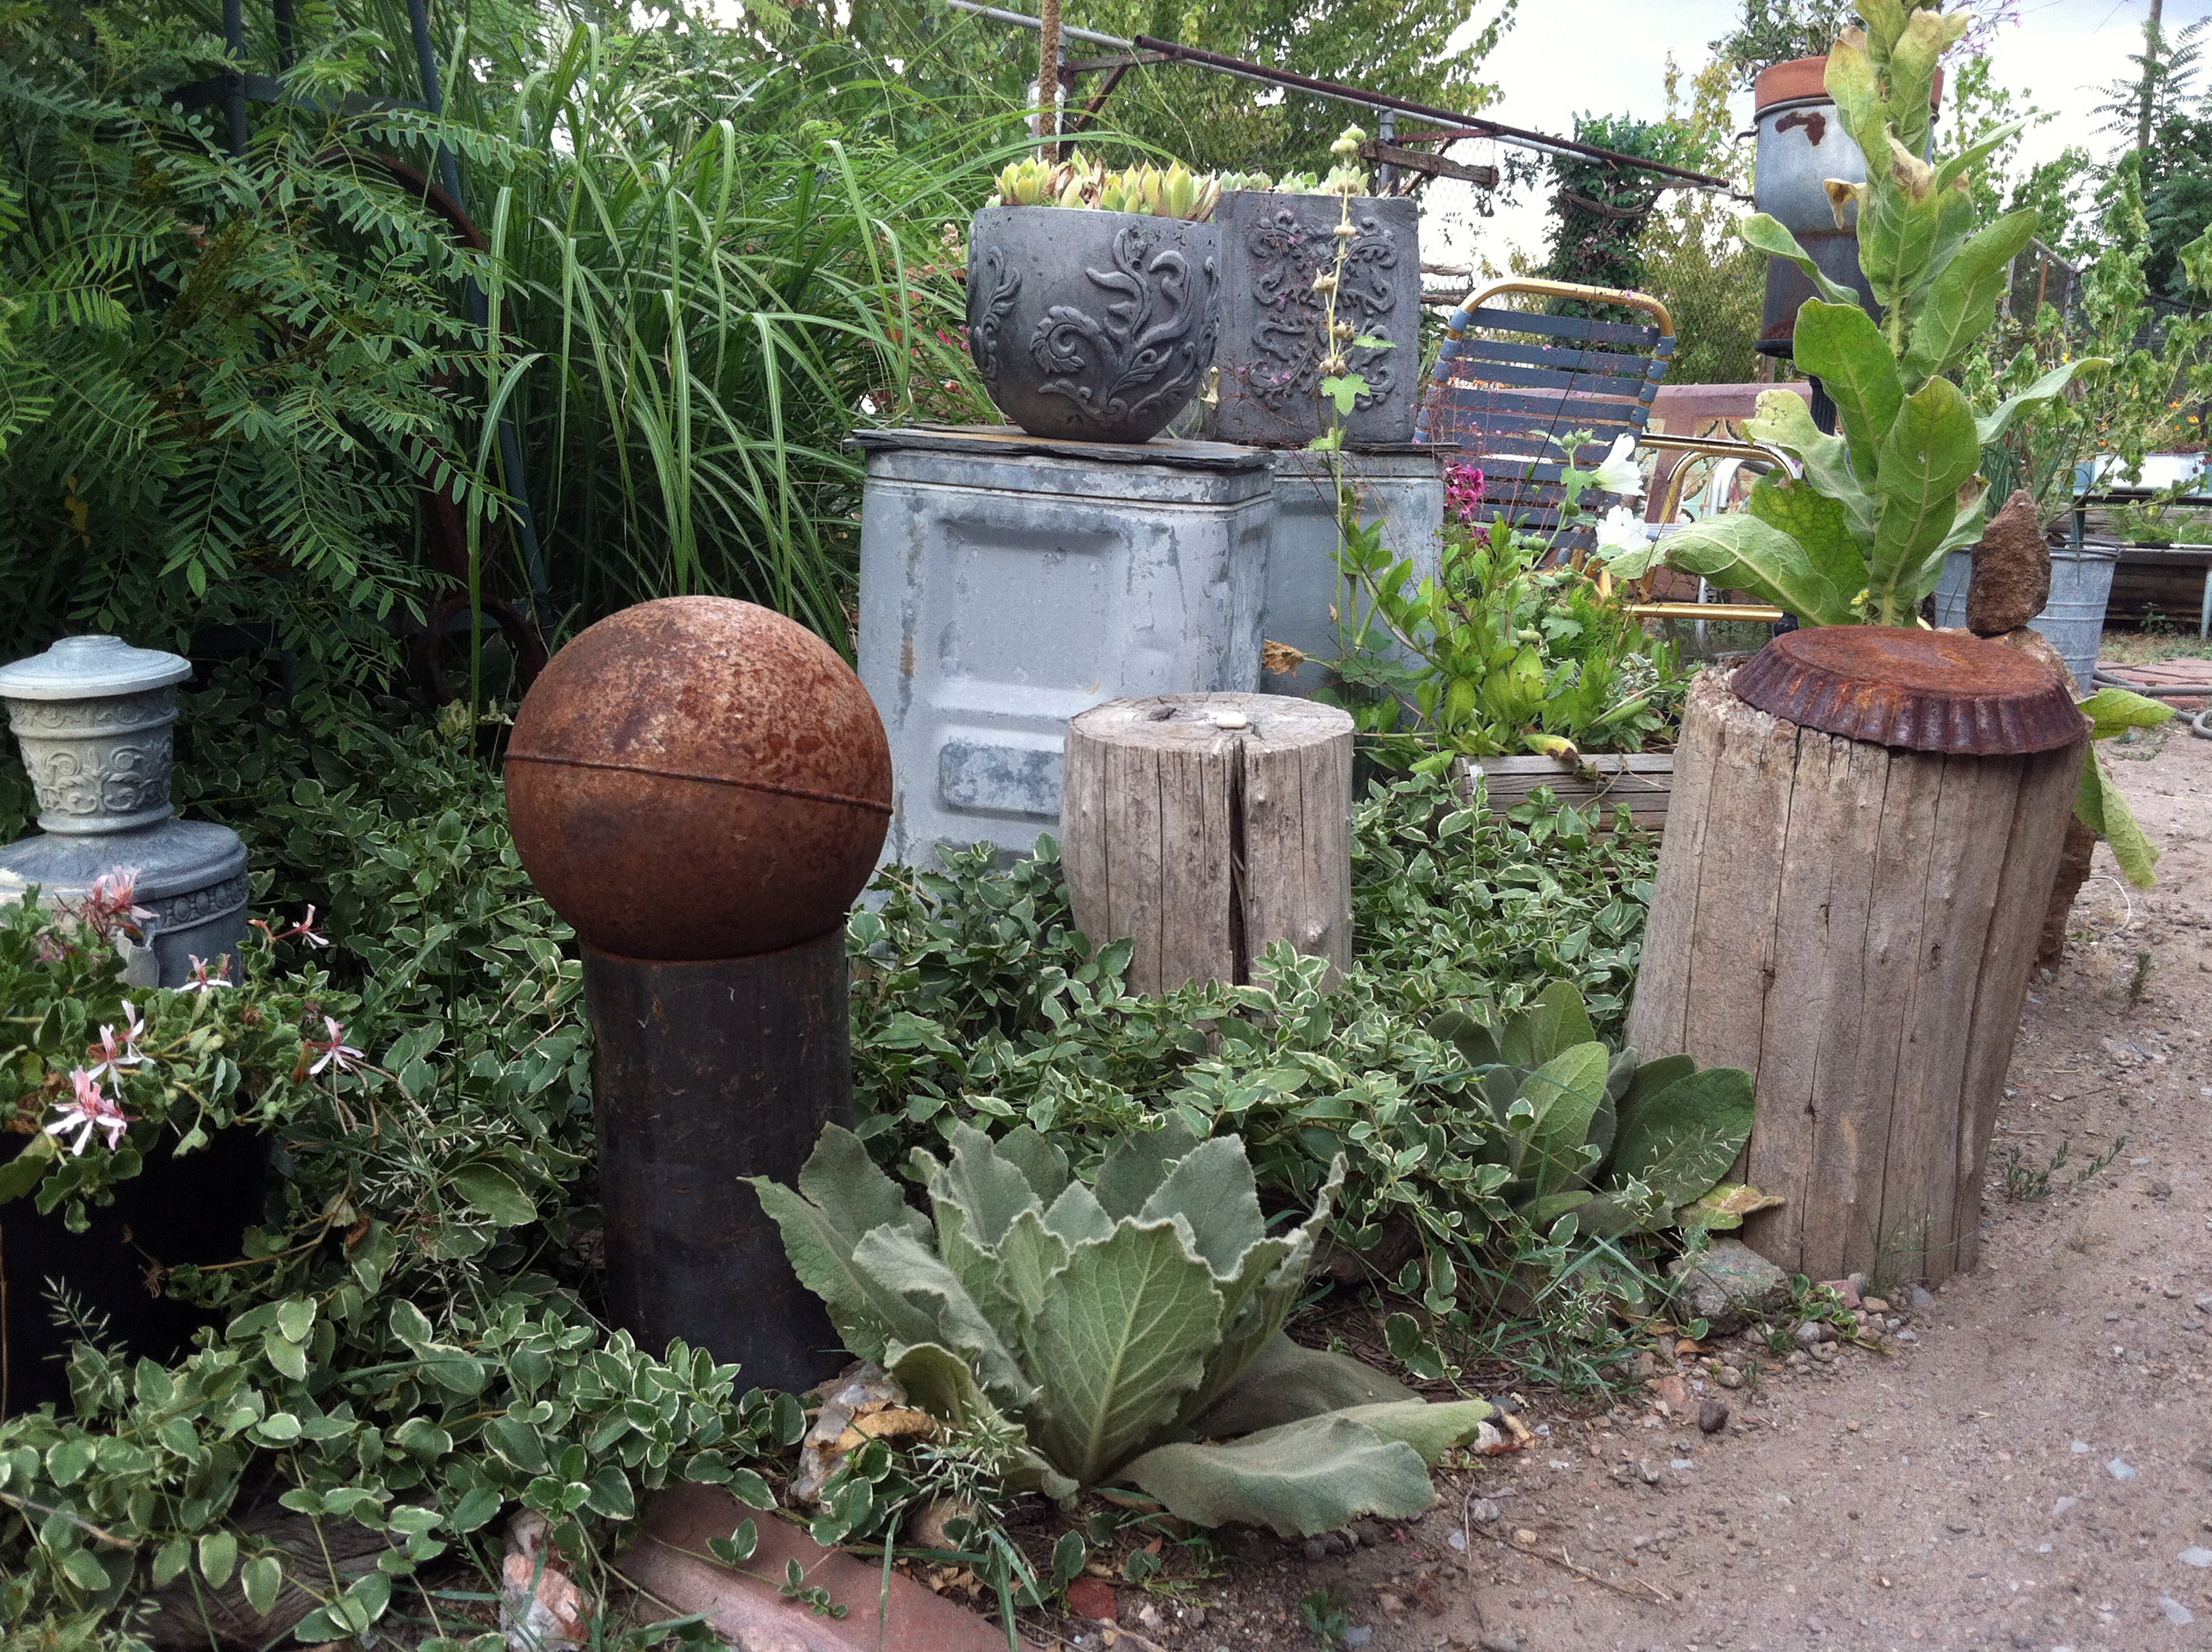 An Industrial Found Object Garden Delights More Fun Ideas To Steal